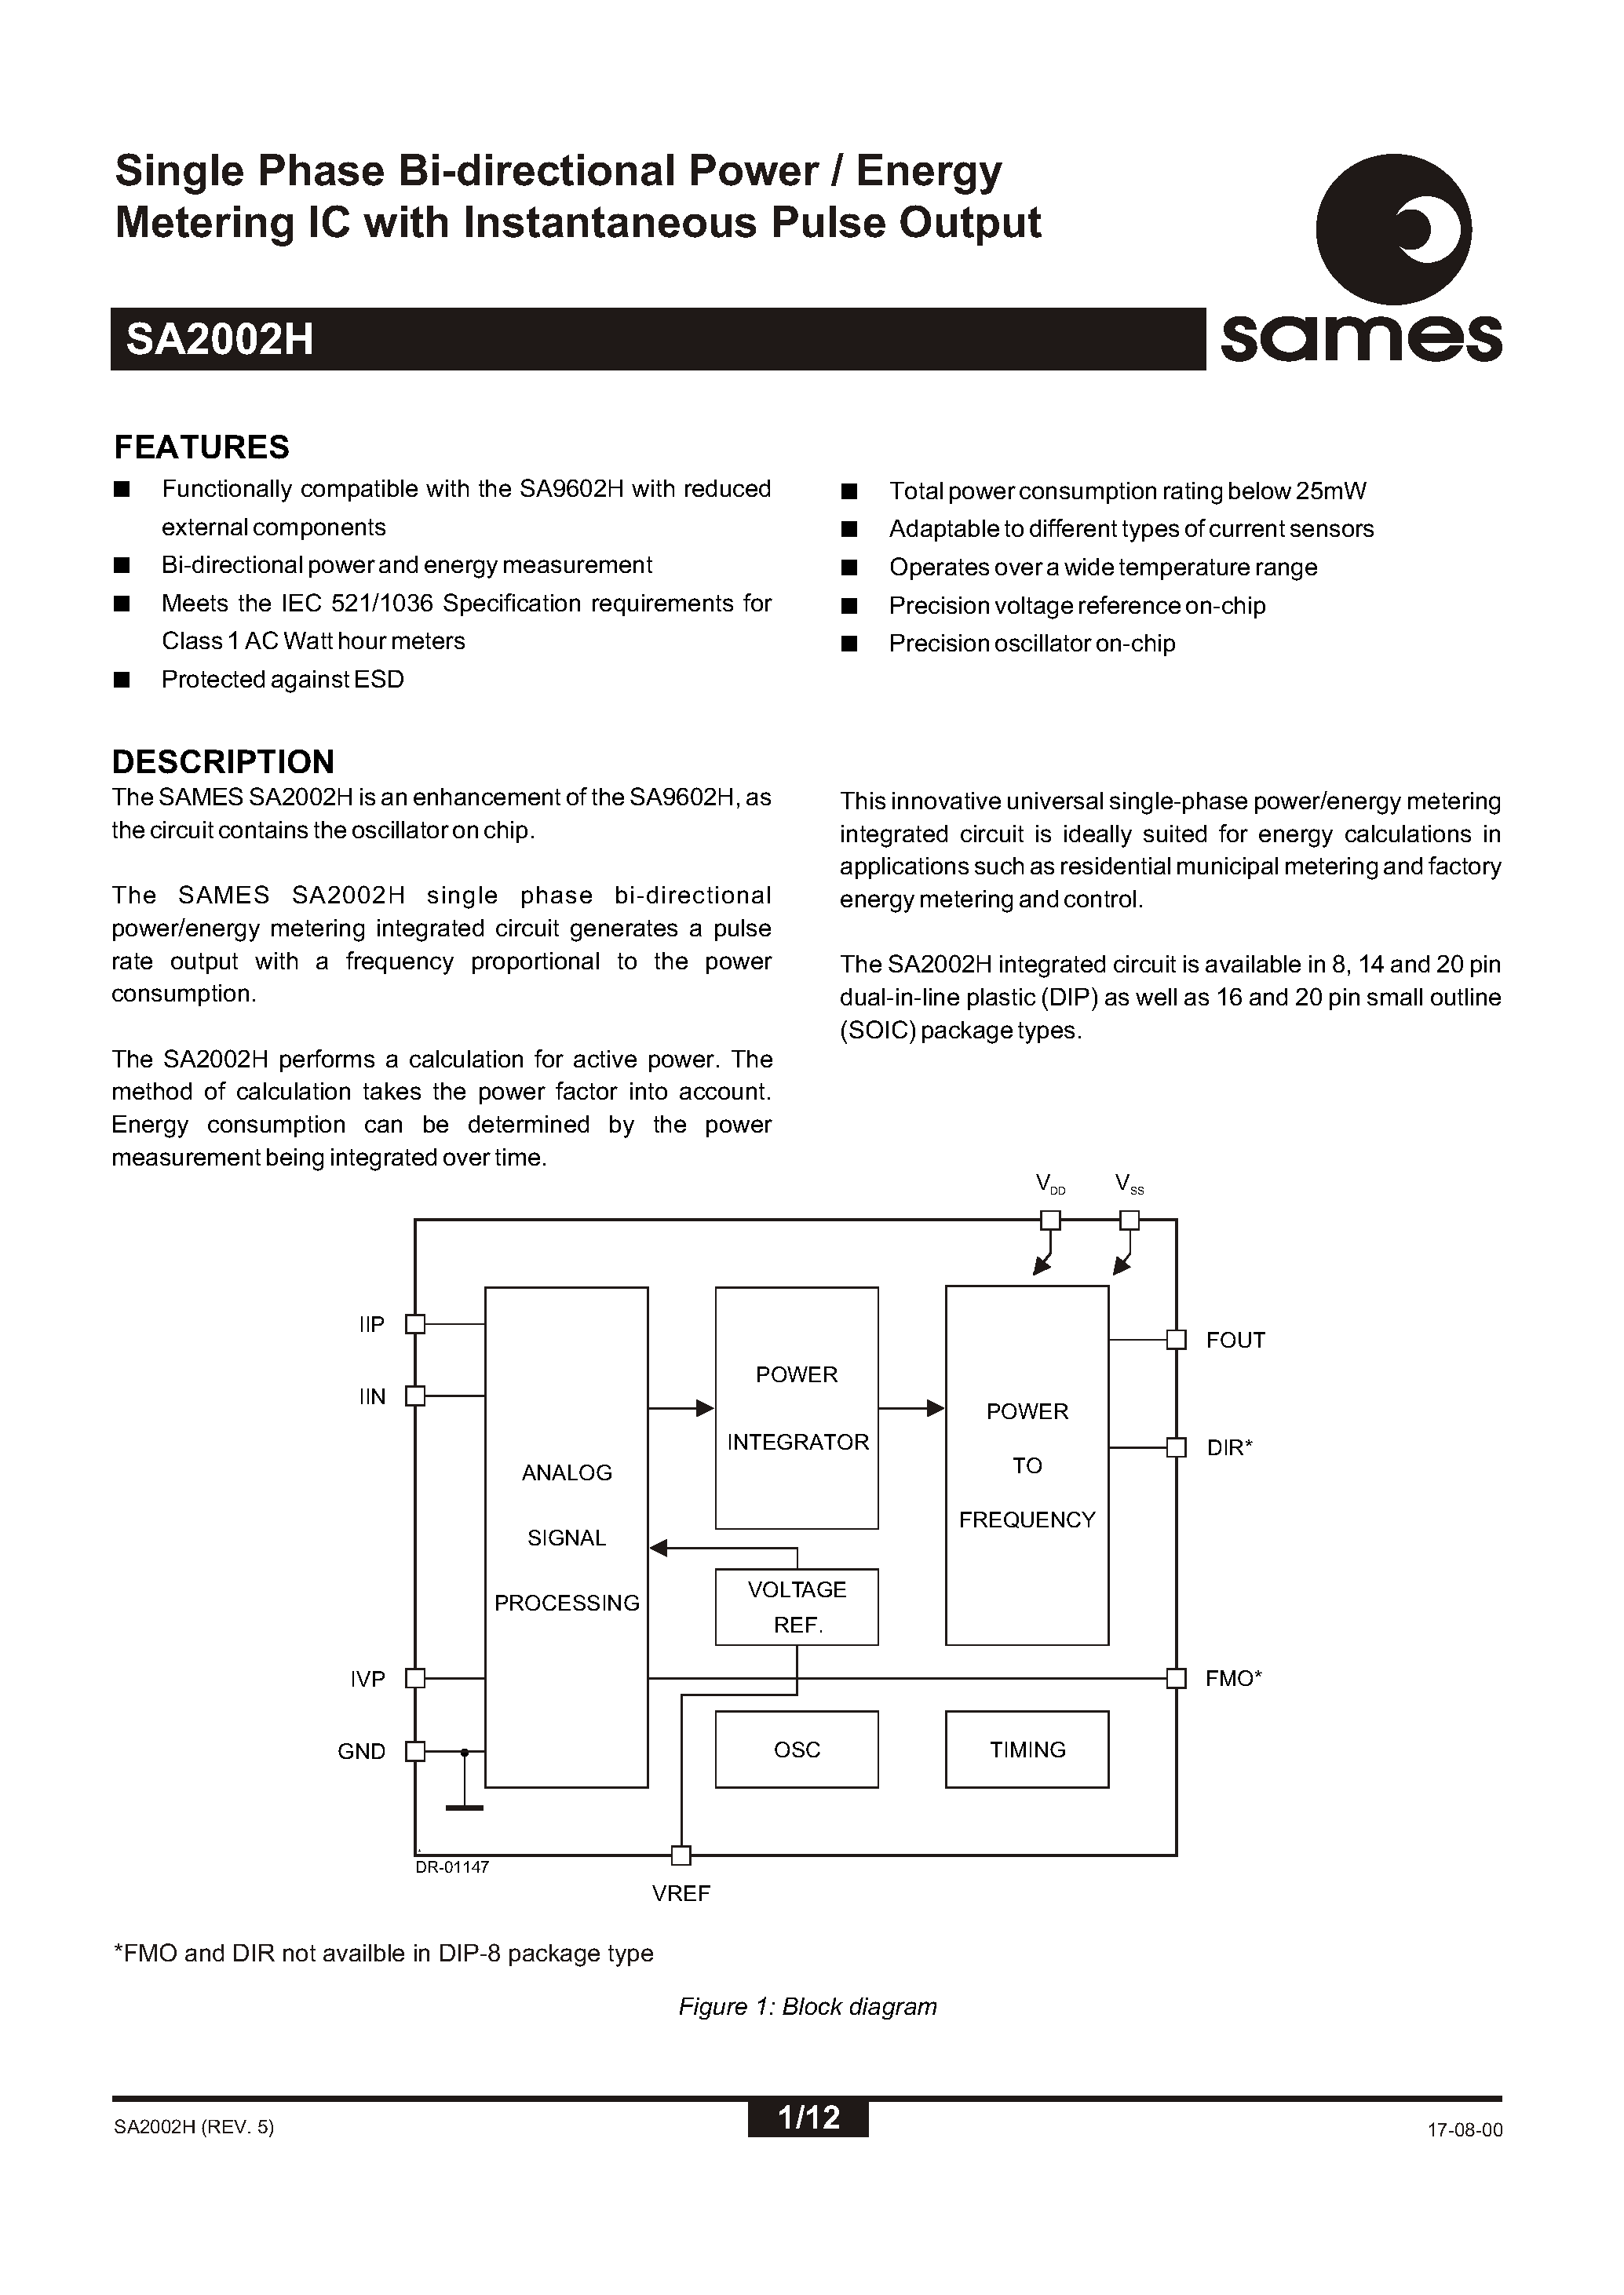 Даташит SA2002HSA - Single Phase Bi-directional Power / Energy Metering IC with Instantaneous Pulse Output страница 1